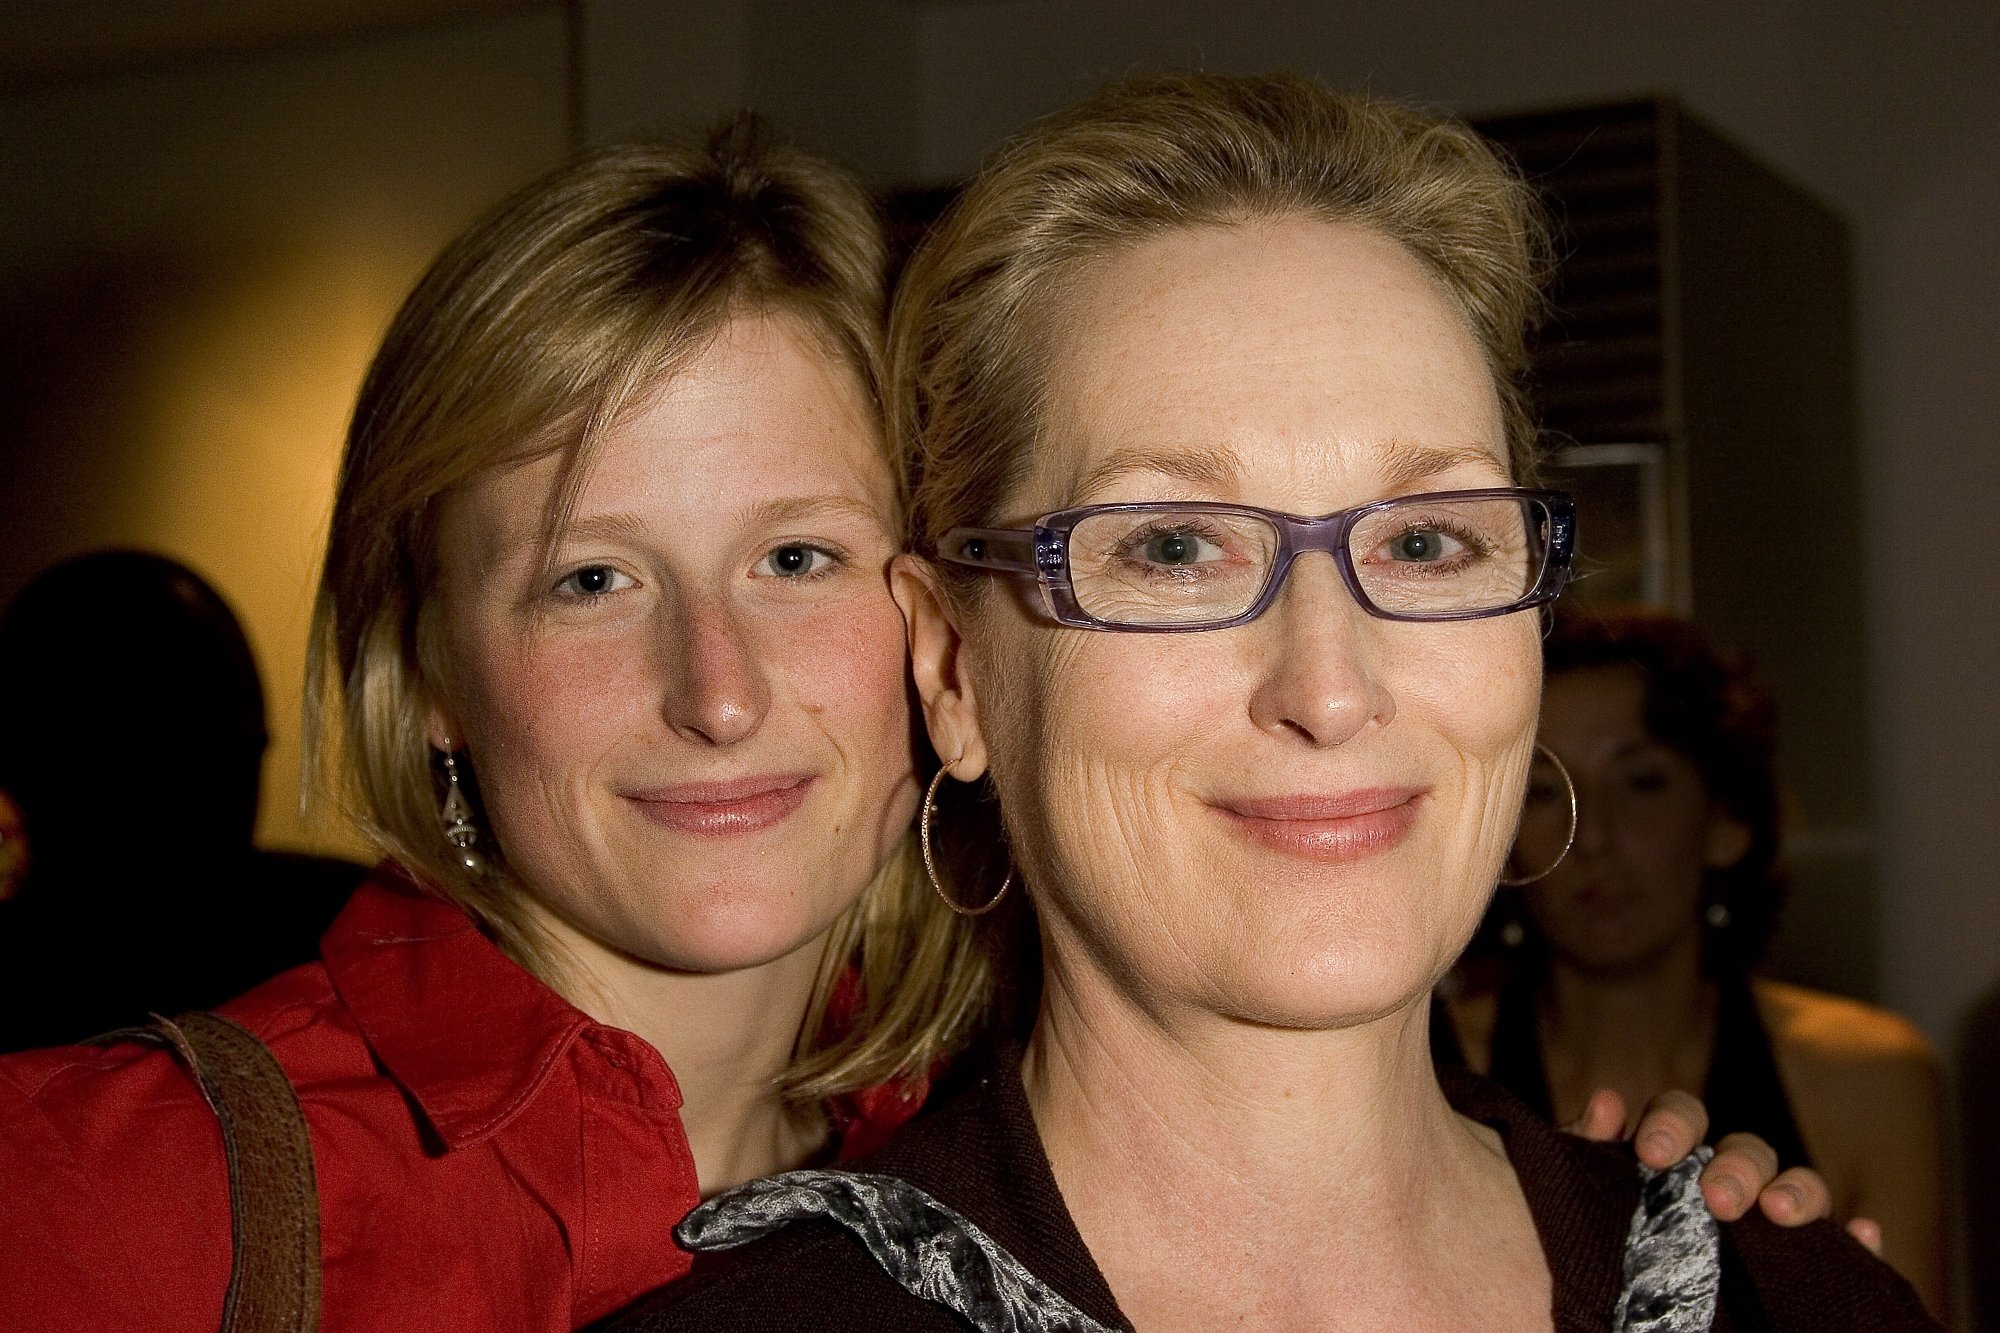 Mamie Gummer and her mother, Meryl Streep, wearing red and black with Mamie's hand on Meryl's shoulder